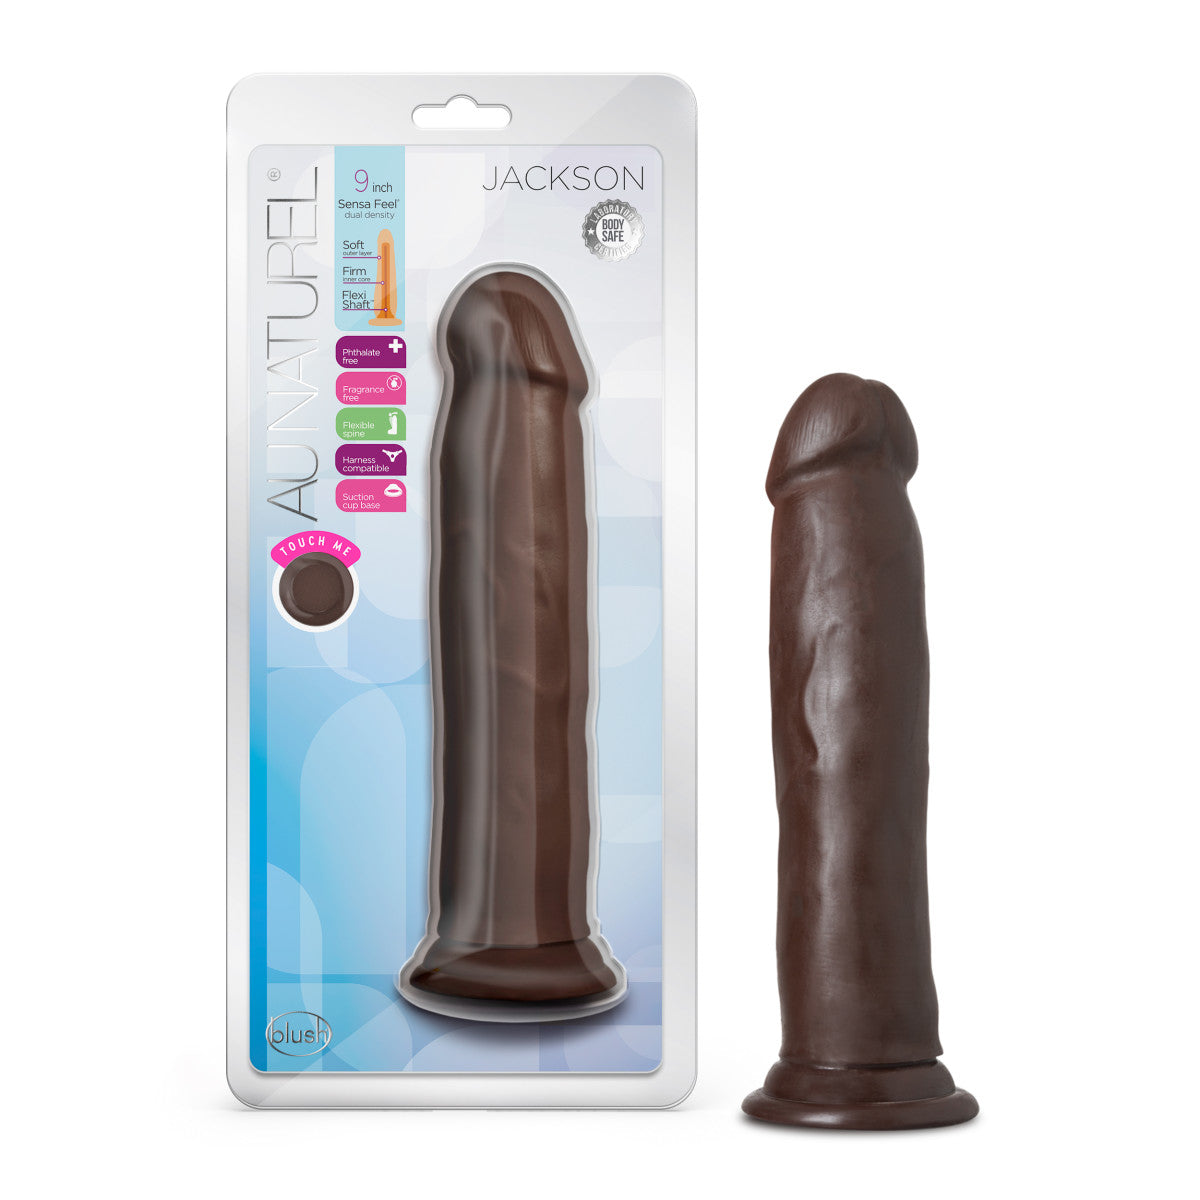 Au Naturel Jackson Realistic Chocolate 9.5-Inch Long Dildo With Suction Cup Base